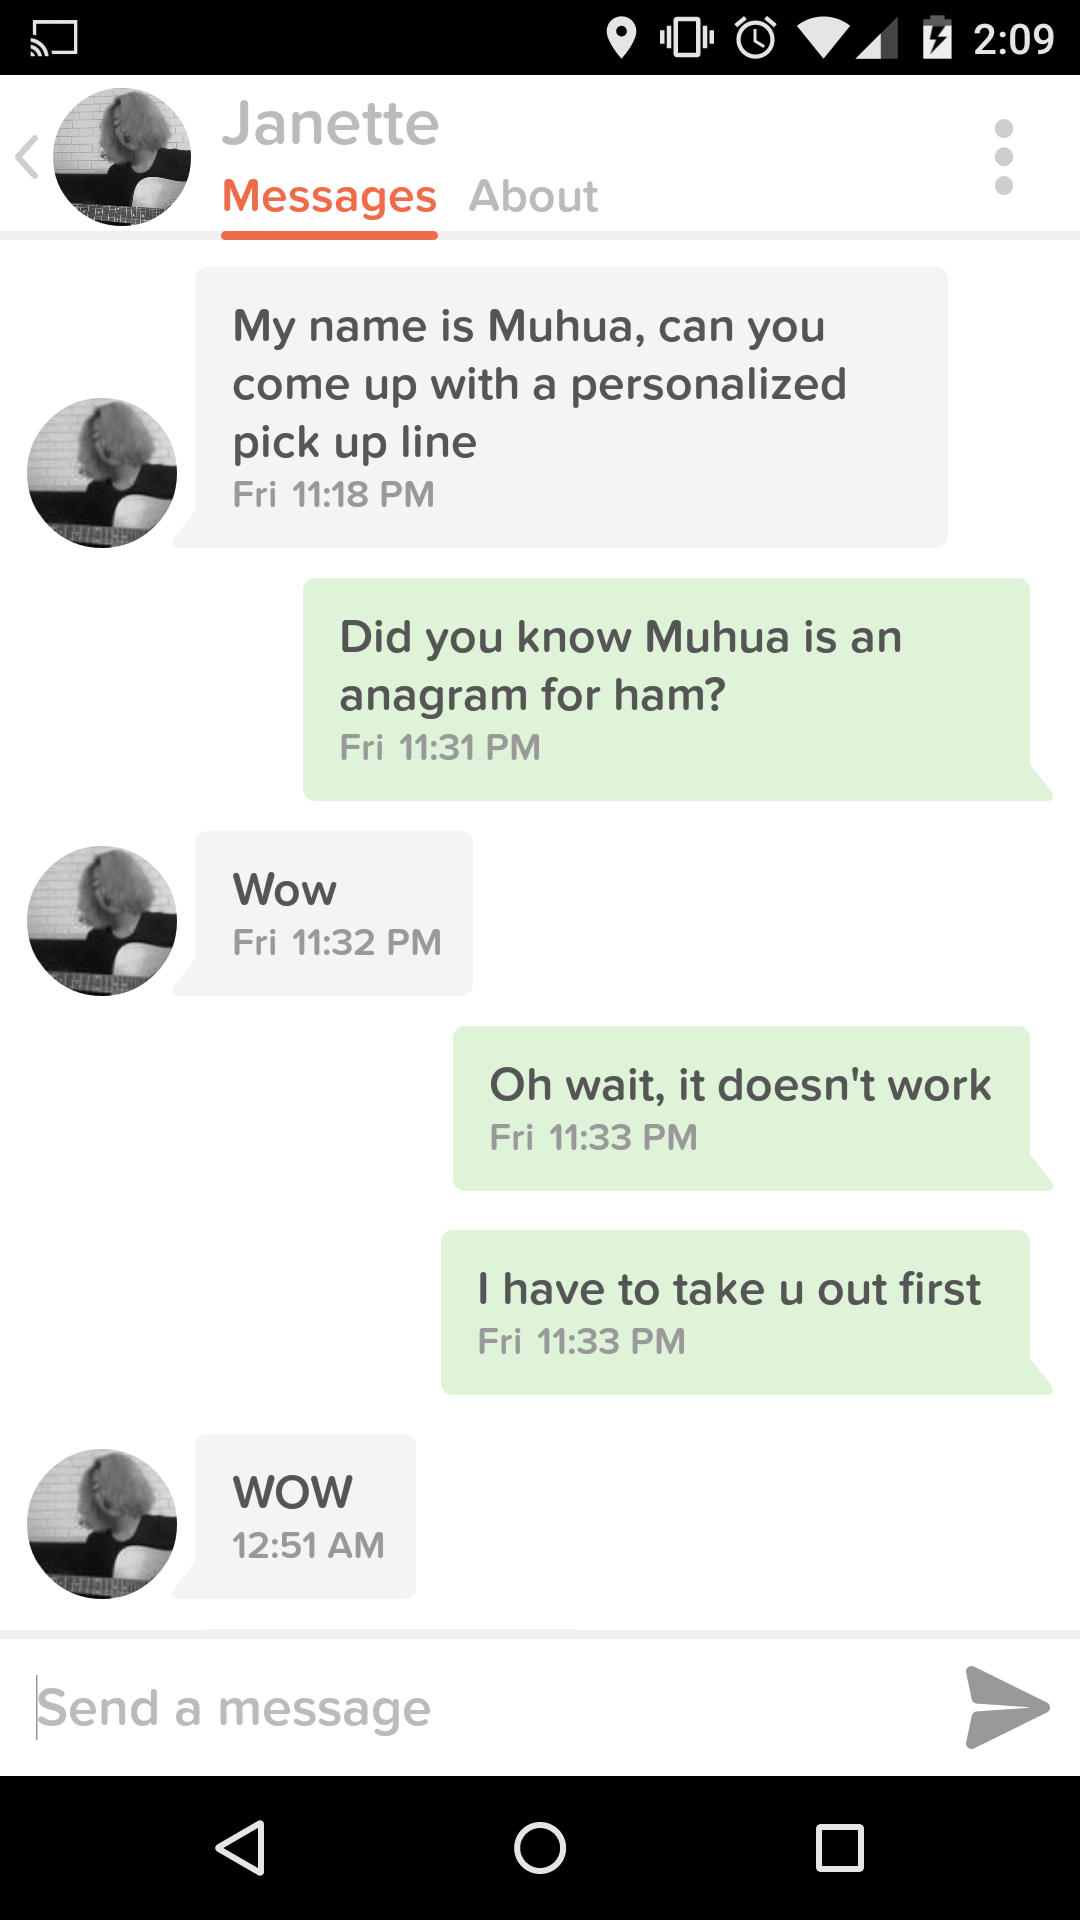 cringe screenshot - 000VA Janette Messages About My name is Muhua, can you come up with a personalized pick up line Fri Did you know Muhua is an anagram for ham? Fri Wow Fri Oh wait, it doesn't work Fri I have to take u out first Fri Wow Send a message